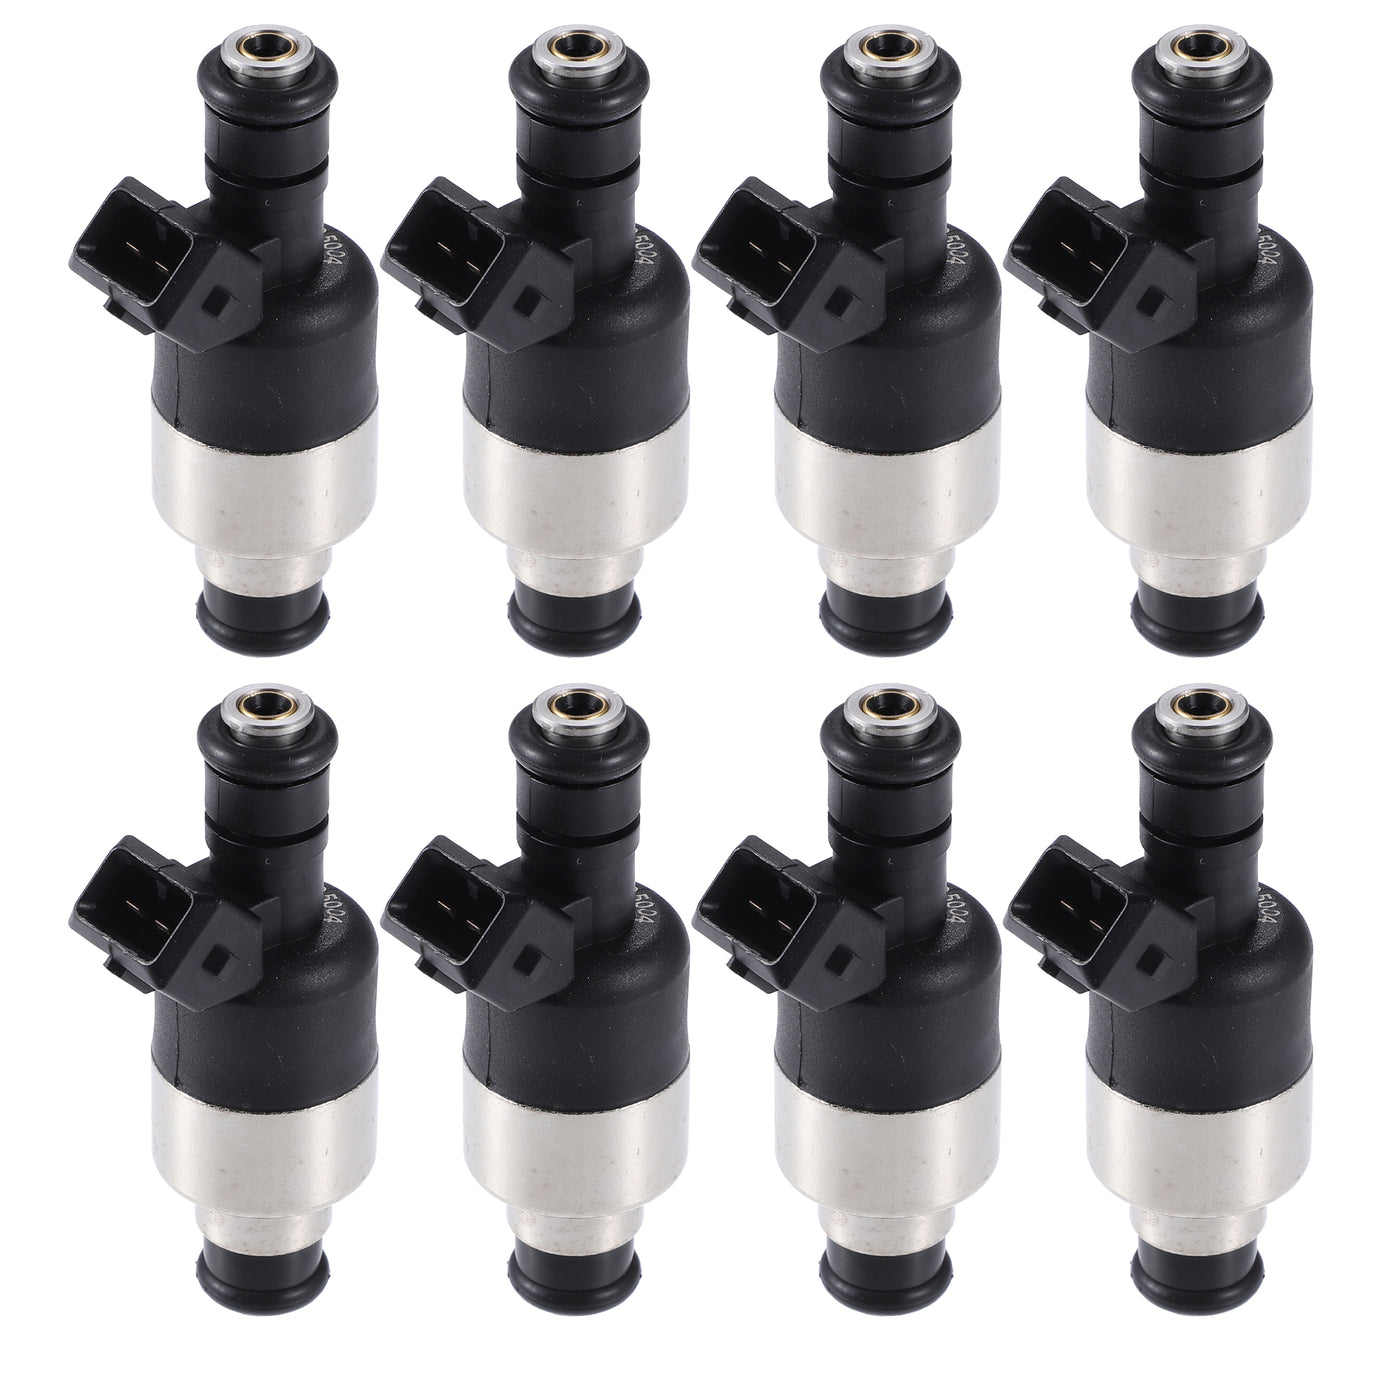 ACROPIX Car Fuel Injector Nozzle Replacement for Chevrolet Camaro 5.7L V8 1994-1997 - Pack of 8